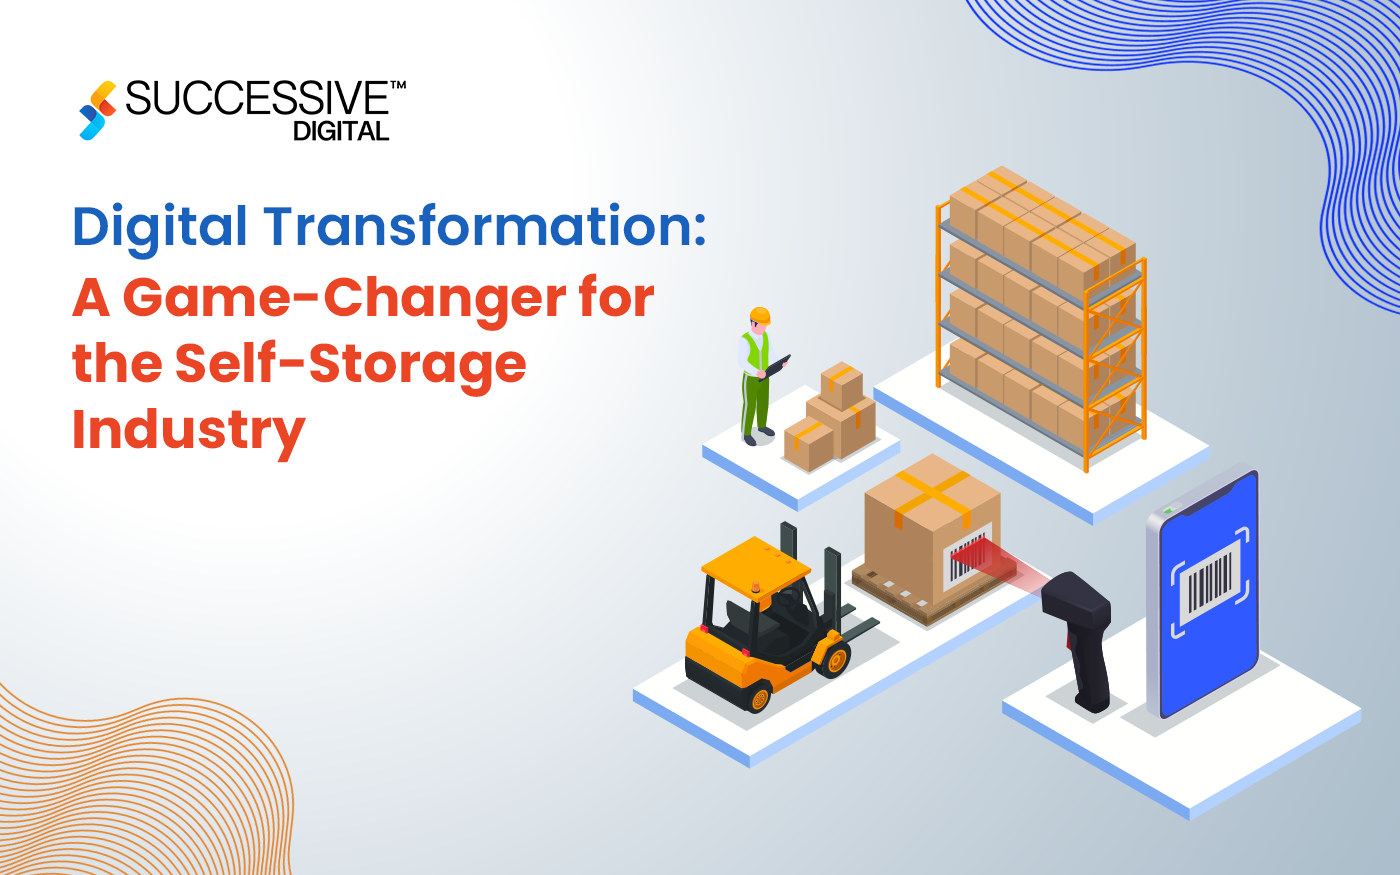 Digital Transformation: A Game-Changer for the Self-Storage Industry